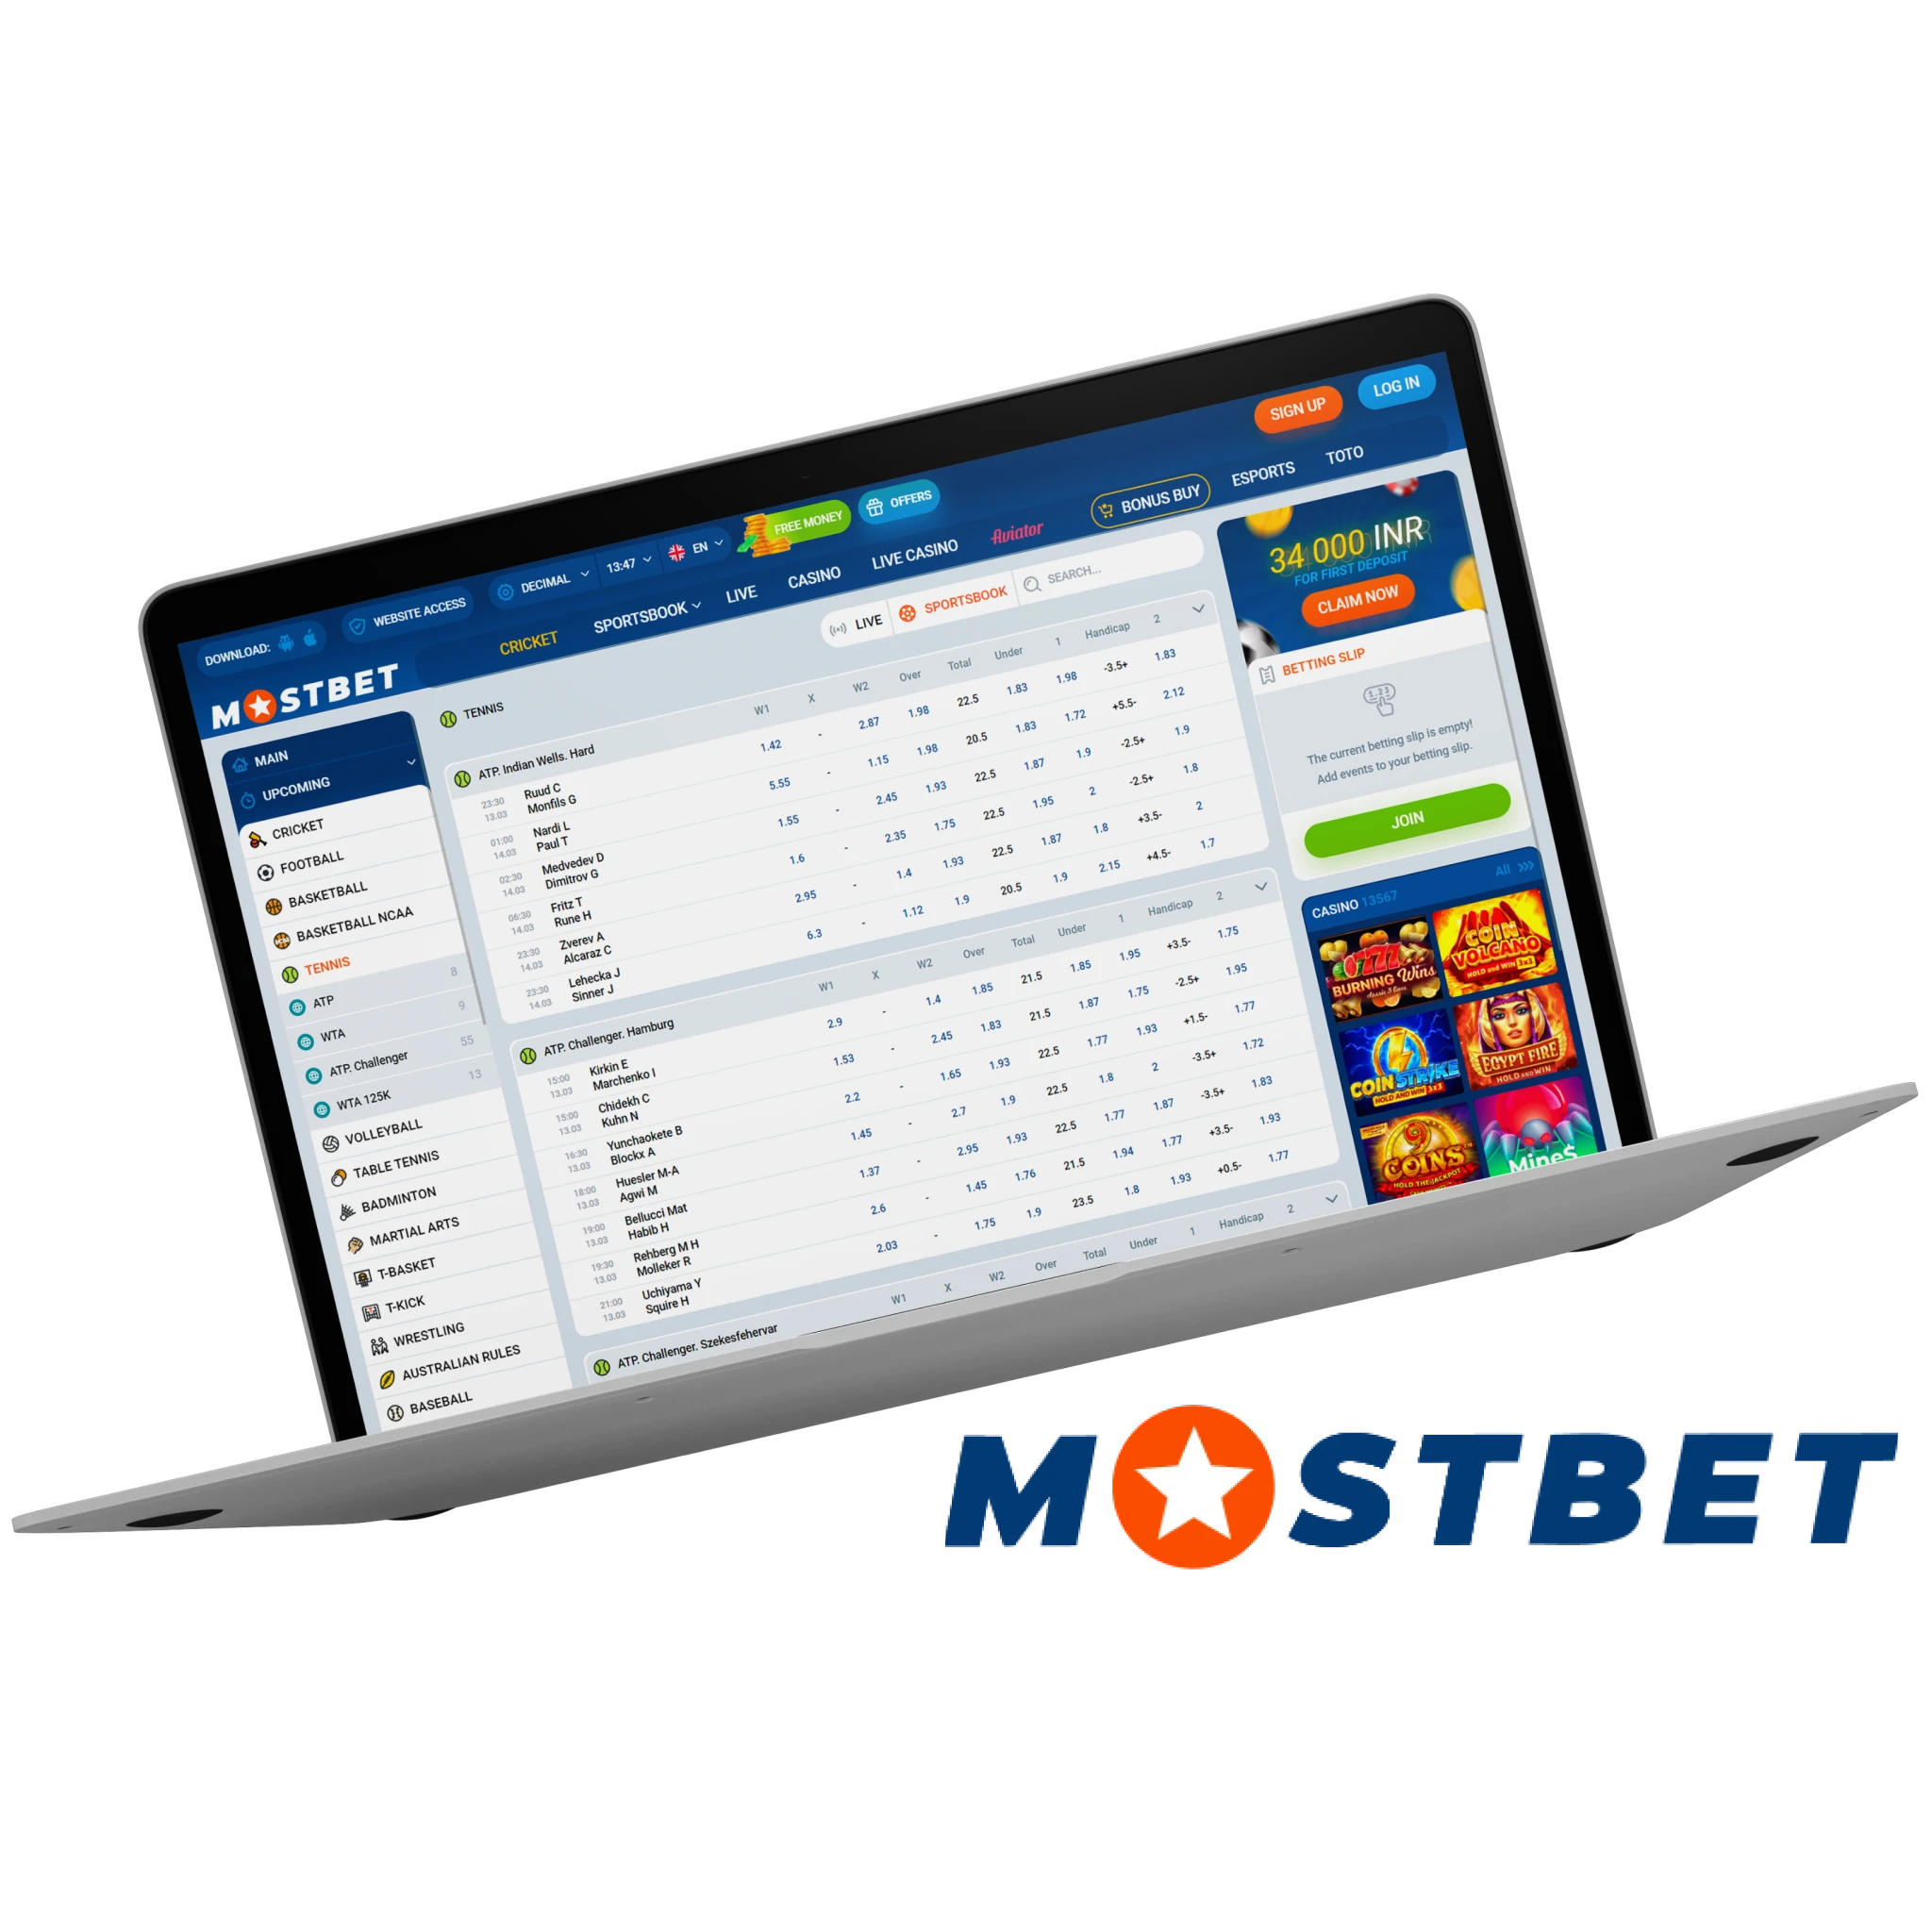 Experience tennis betting with Mostbet, offering diverse tournaments and betting options.